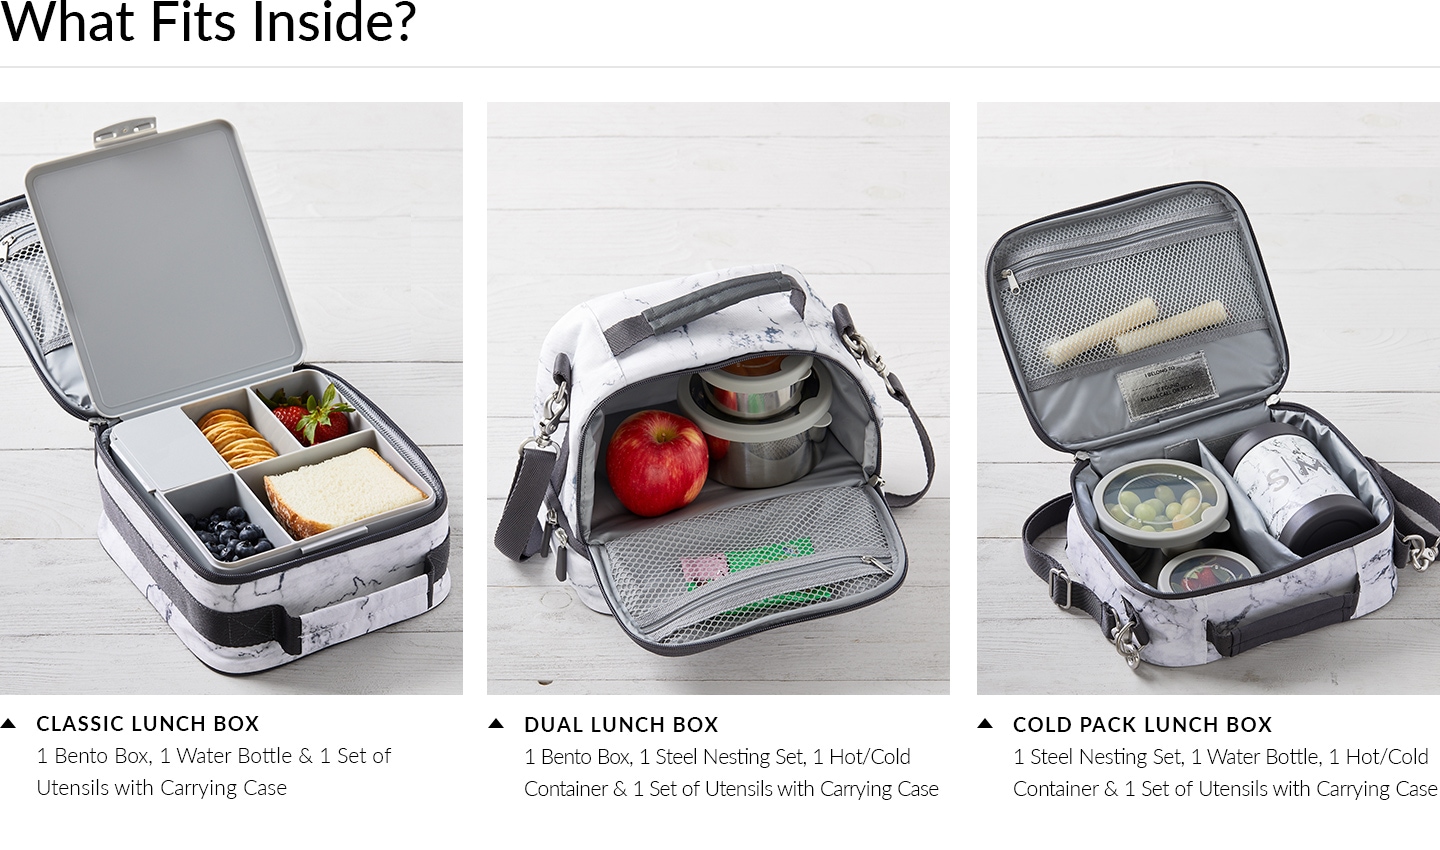 Classic Lunch Box, Dual Lunch Box, Cold Pack Lunch Box